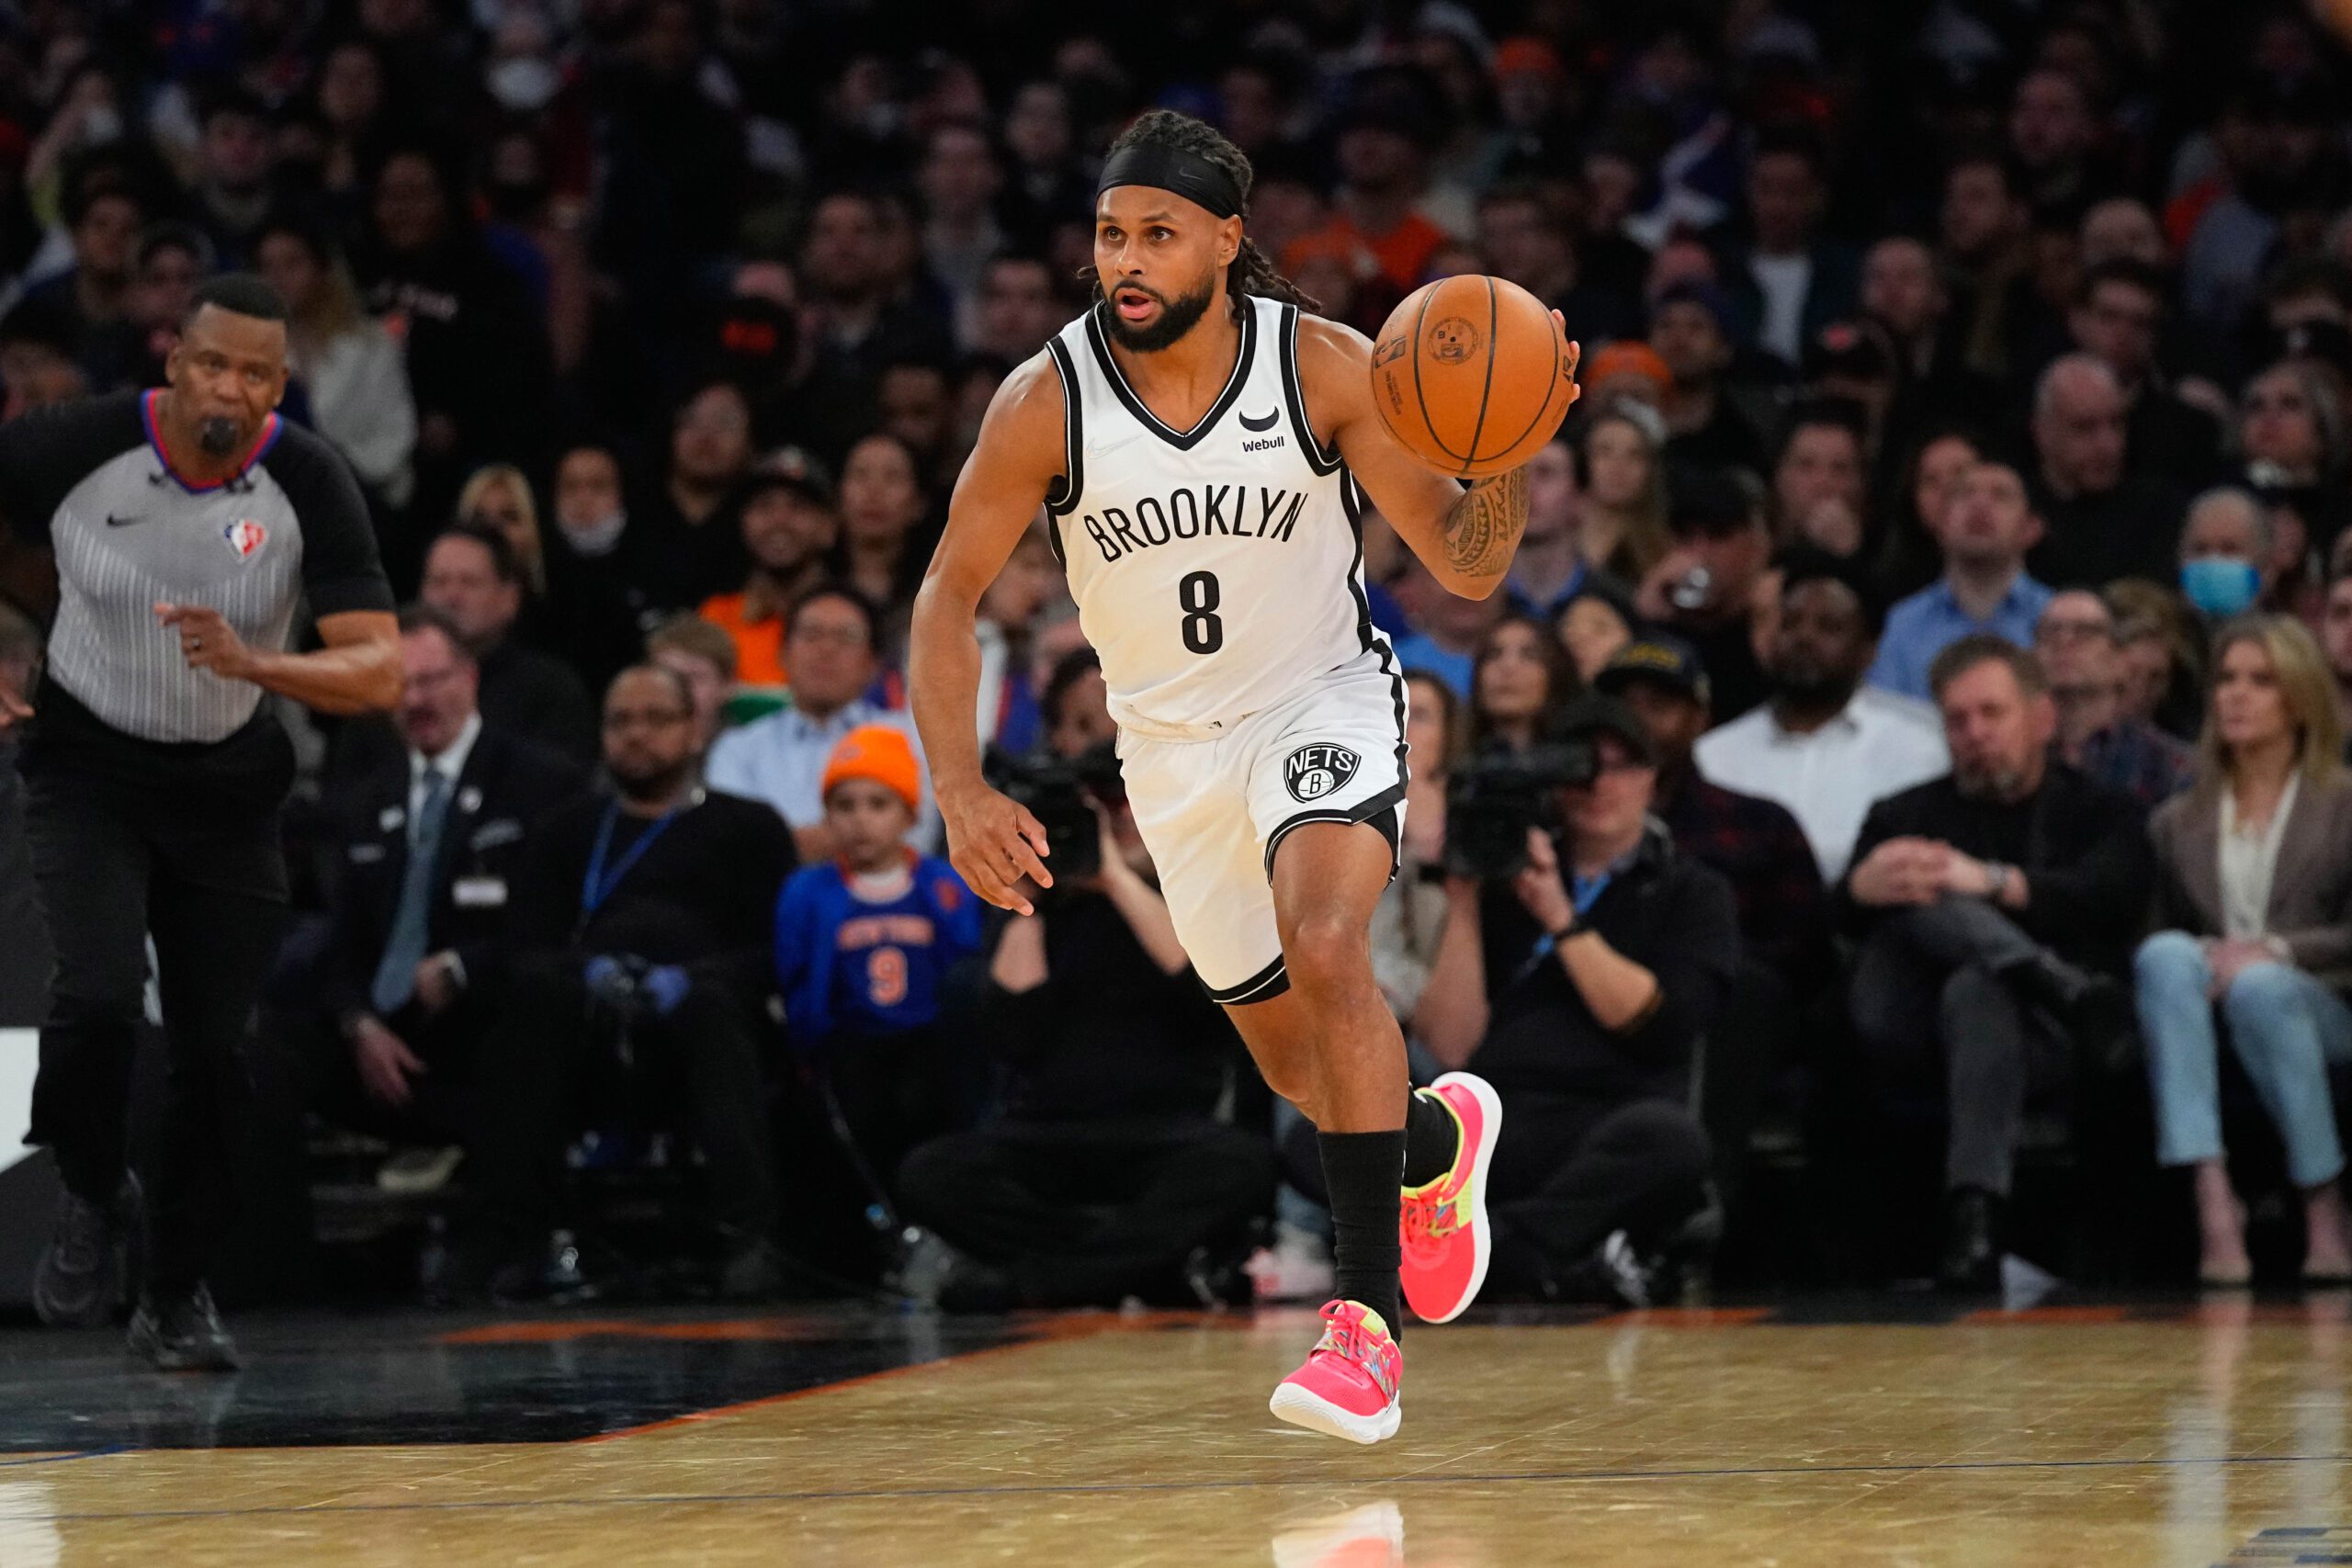 Brooklyn Nets point guard Patty Mills dribbles the ball up the court